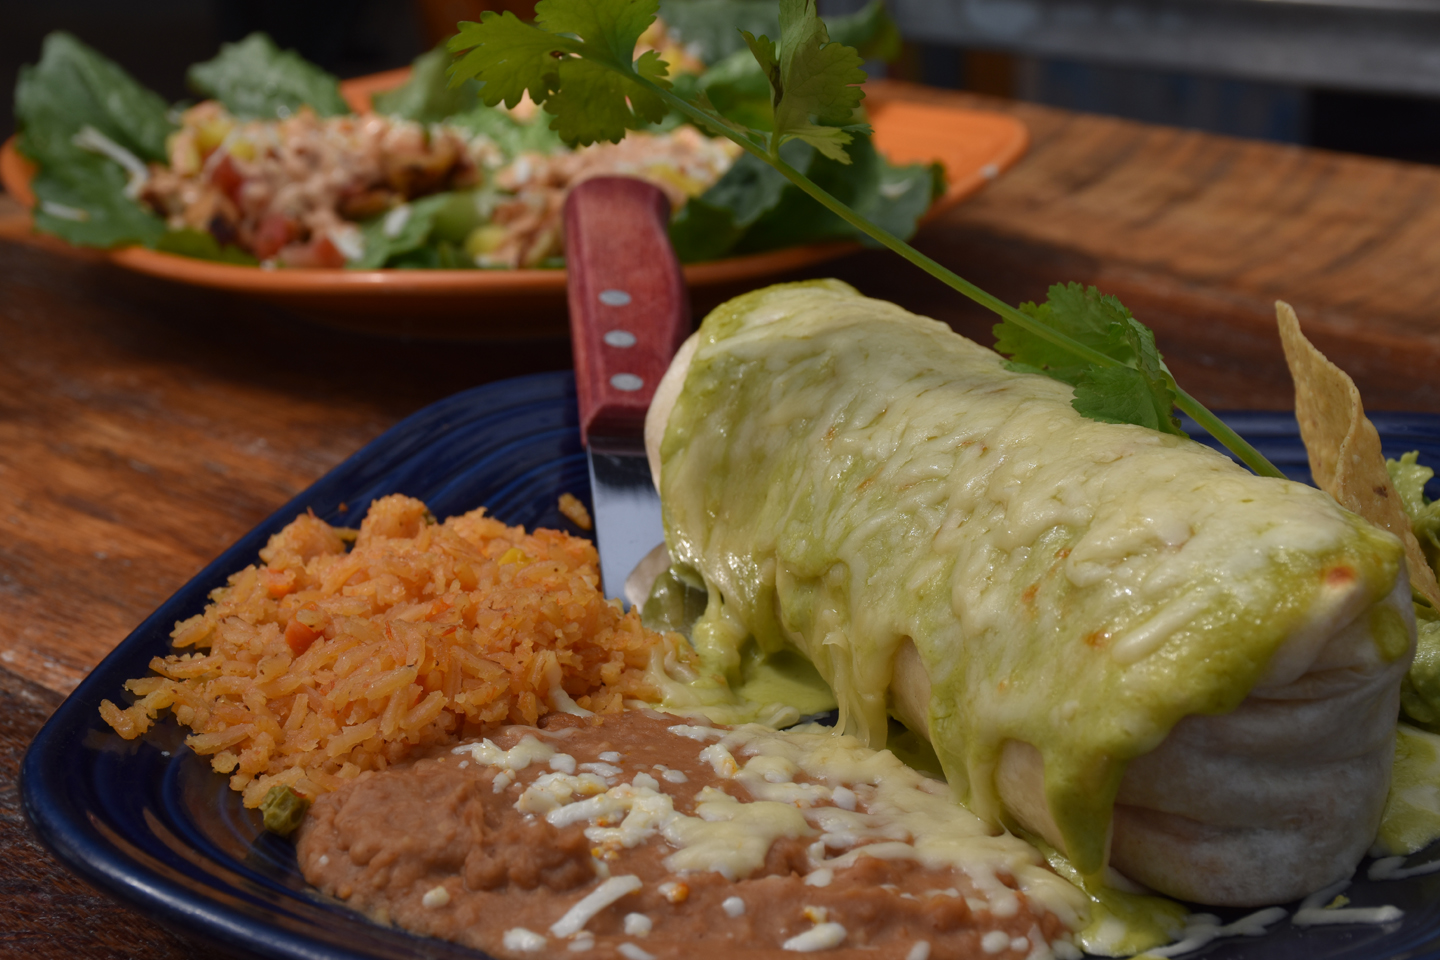 Burritos and Authentic Mexican Food in Kenosha